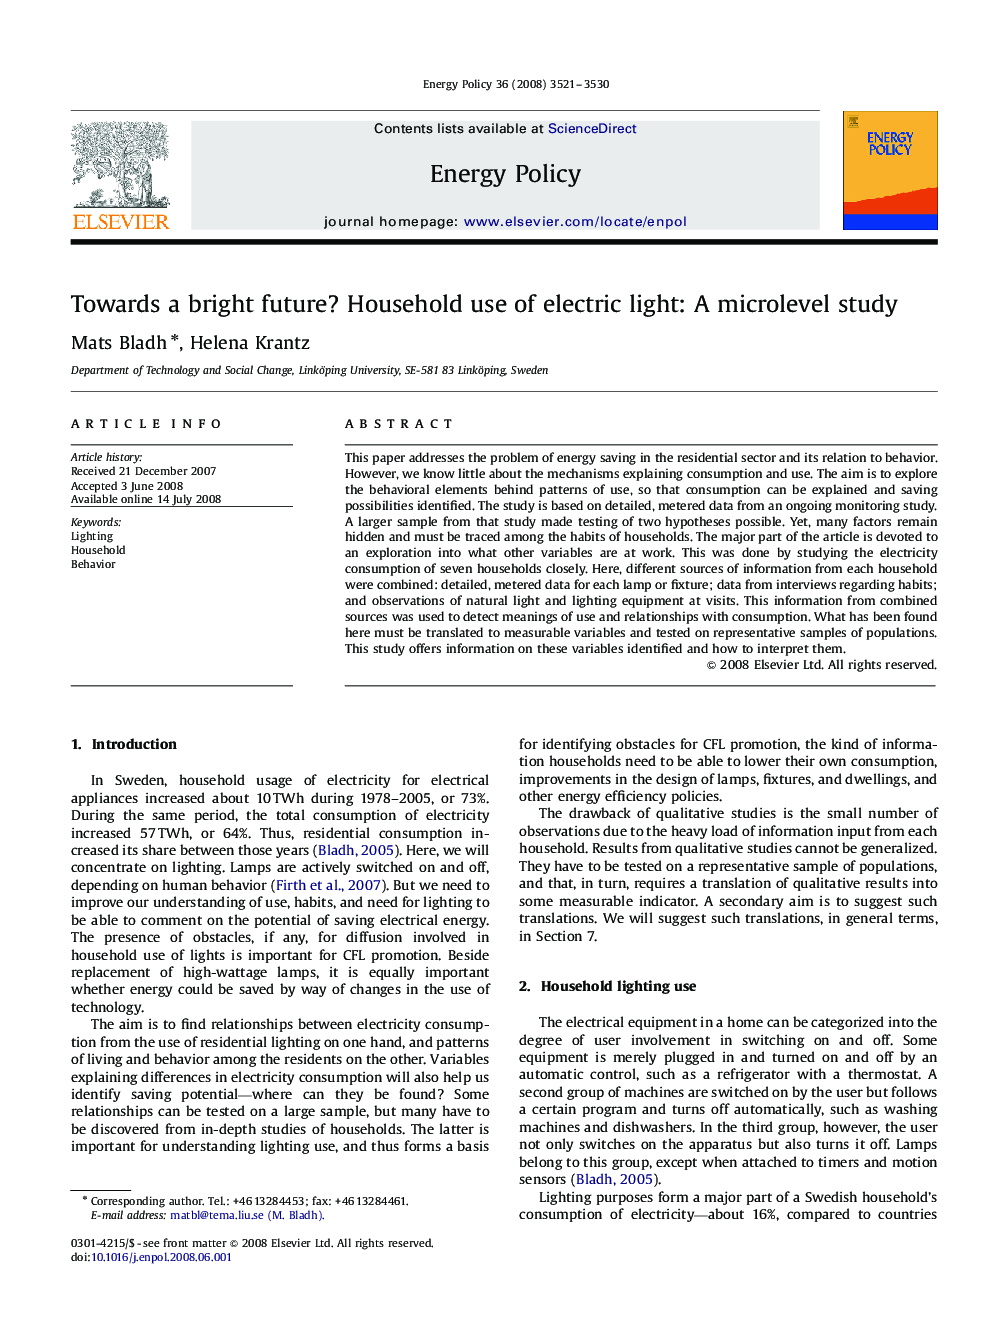 Towards a bright future? Household use of electric light: A microlevel study